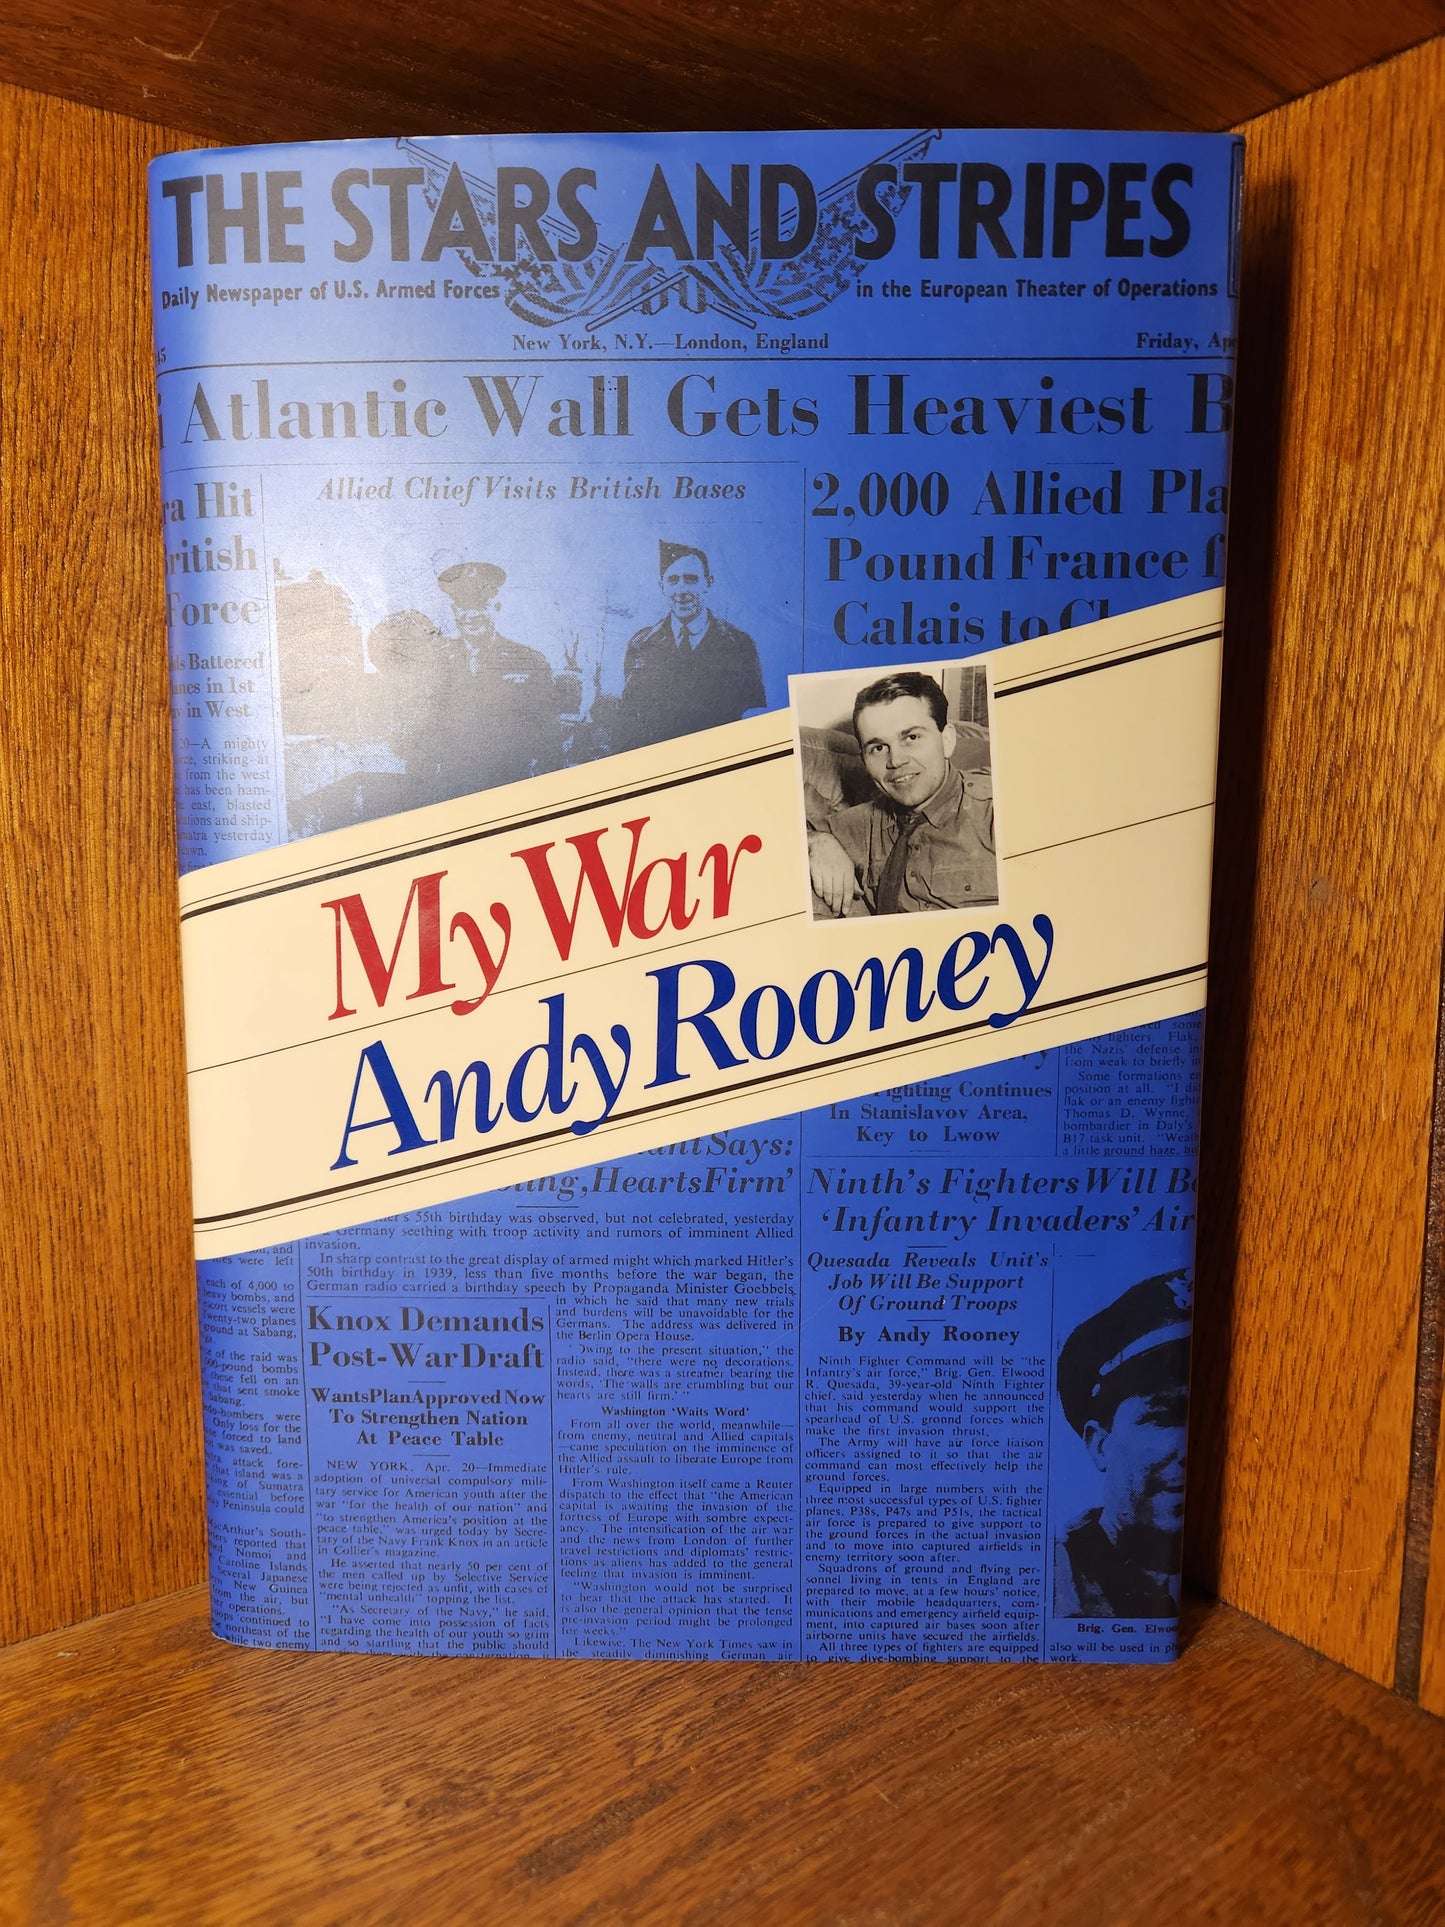 "My War" by Andy Rooney